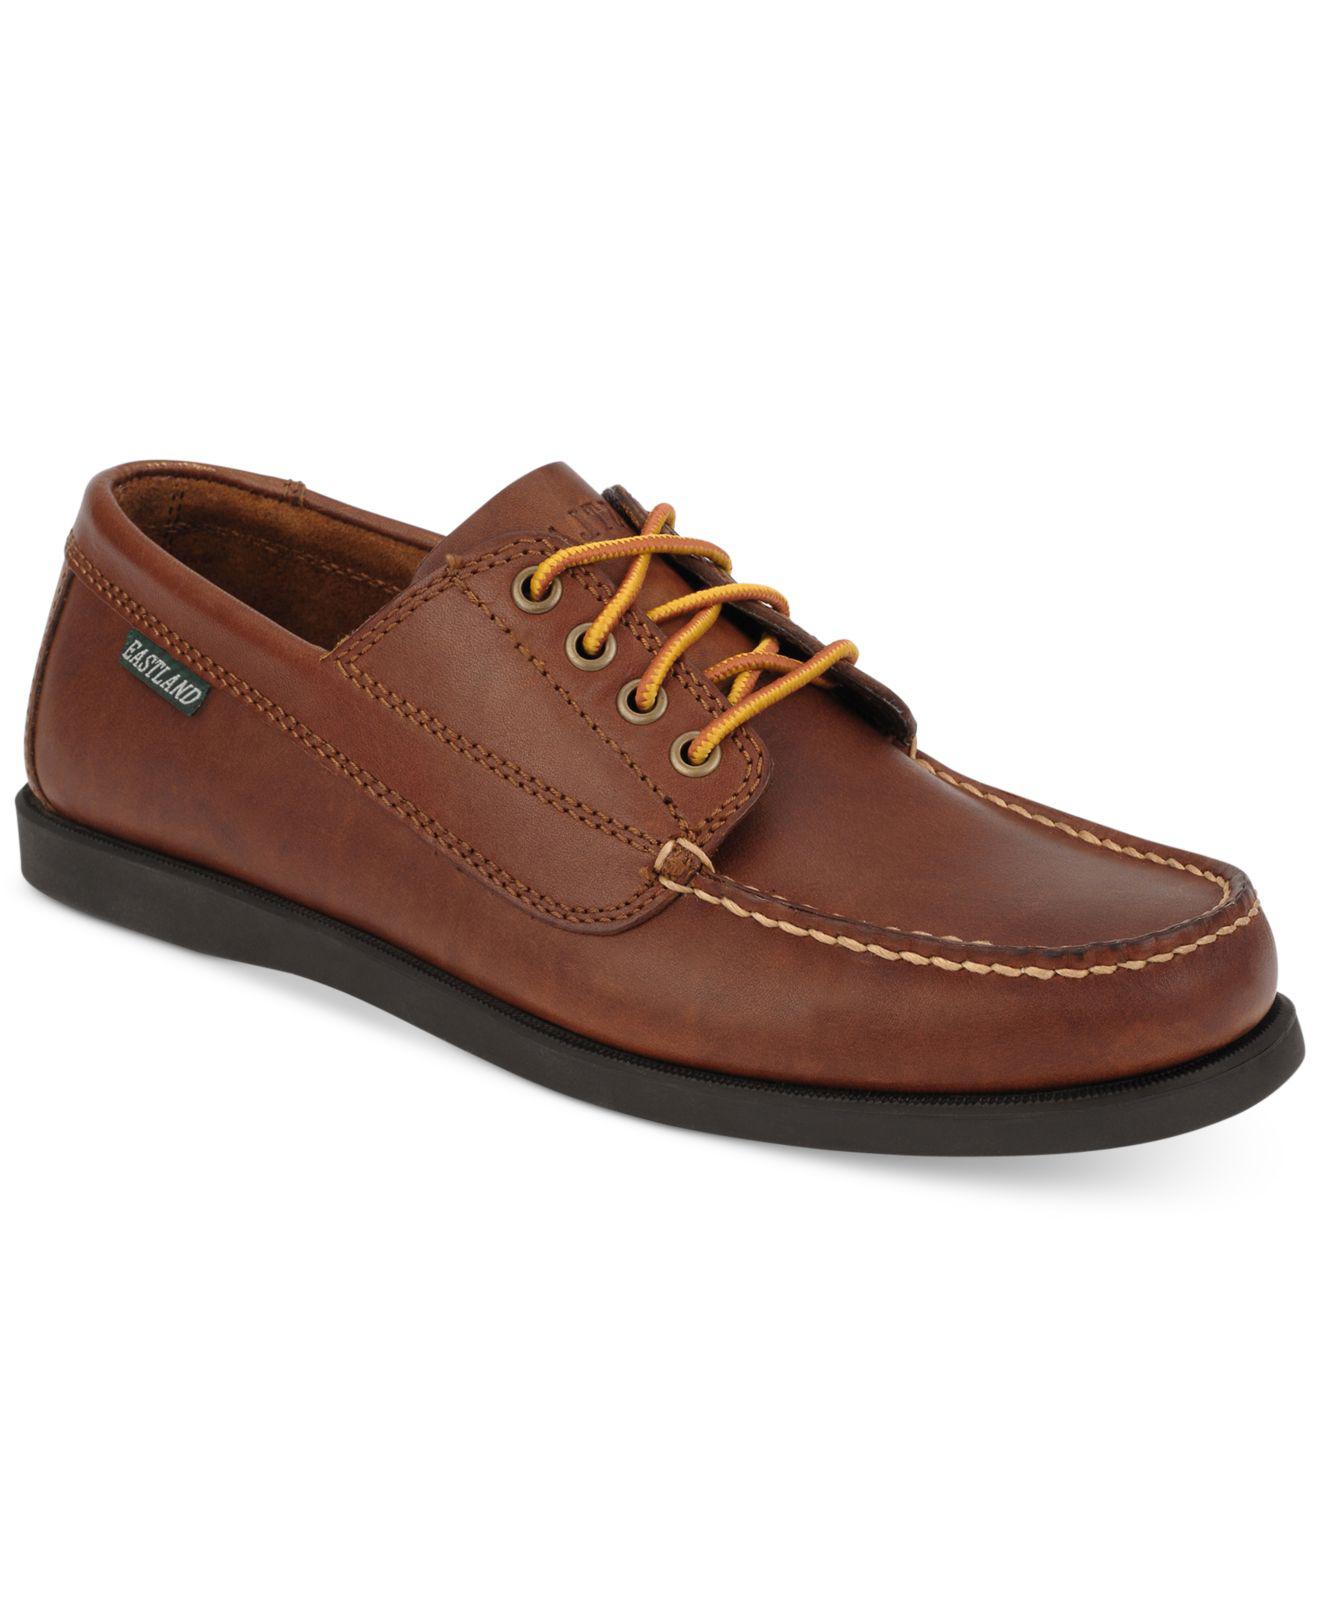 Lyst - Eastland Falmouth Boat Shoes in Brown for Men